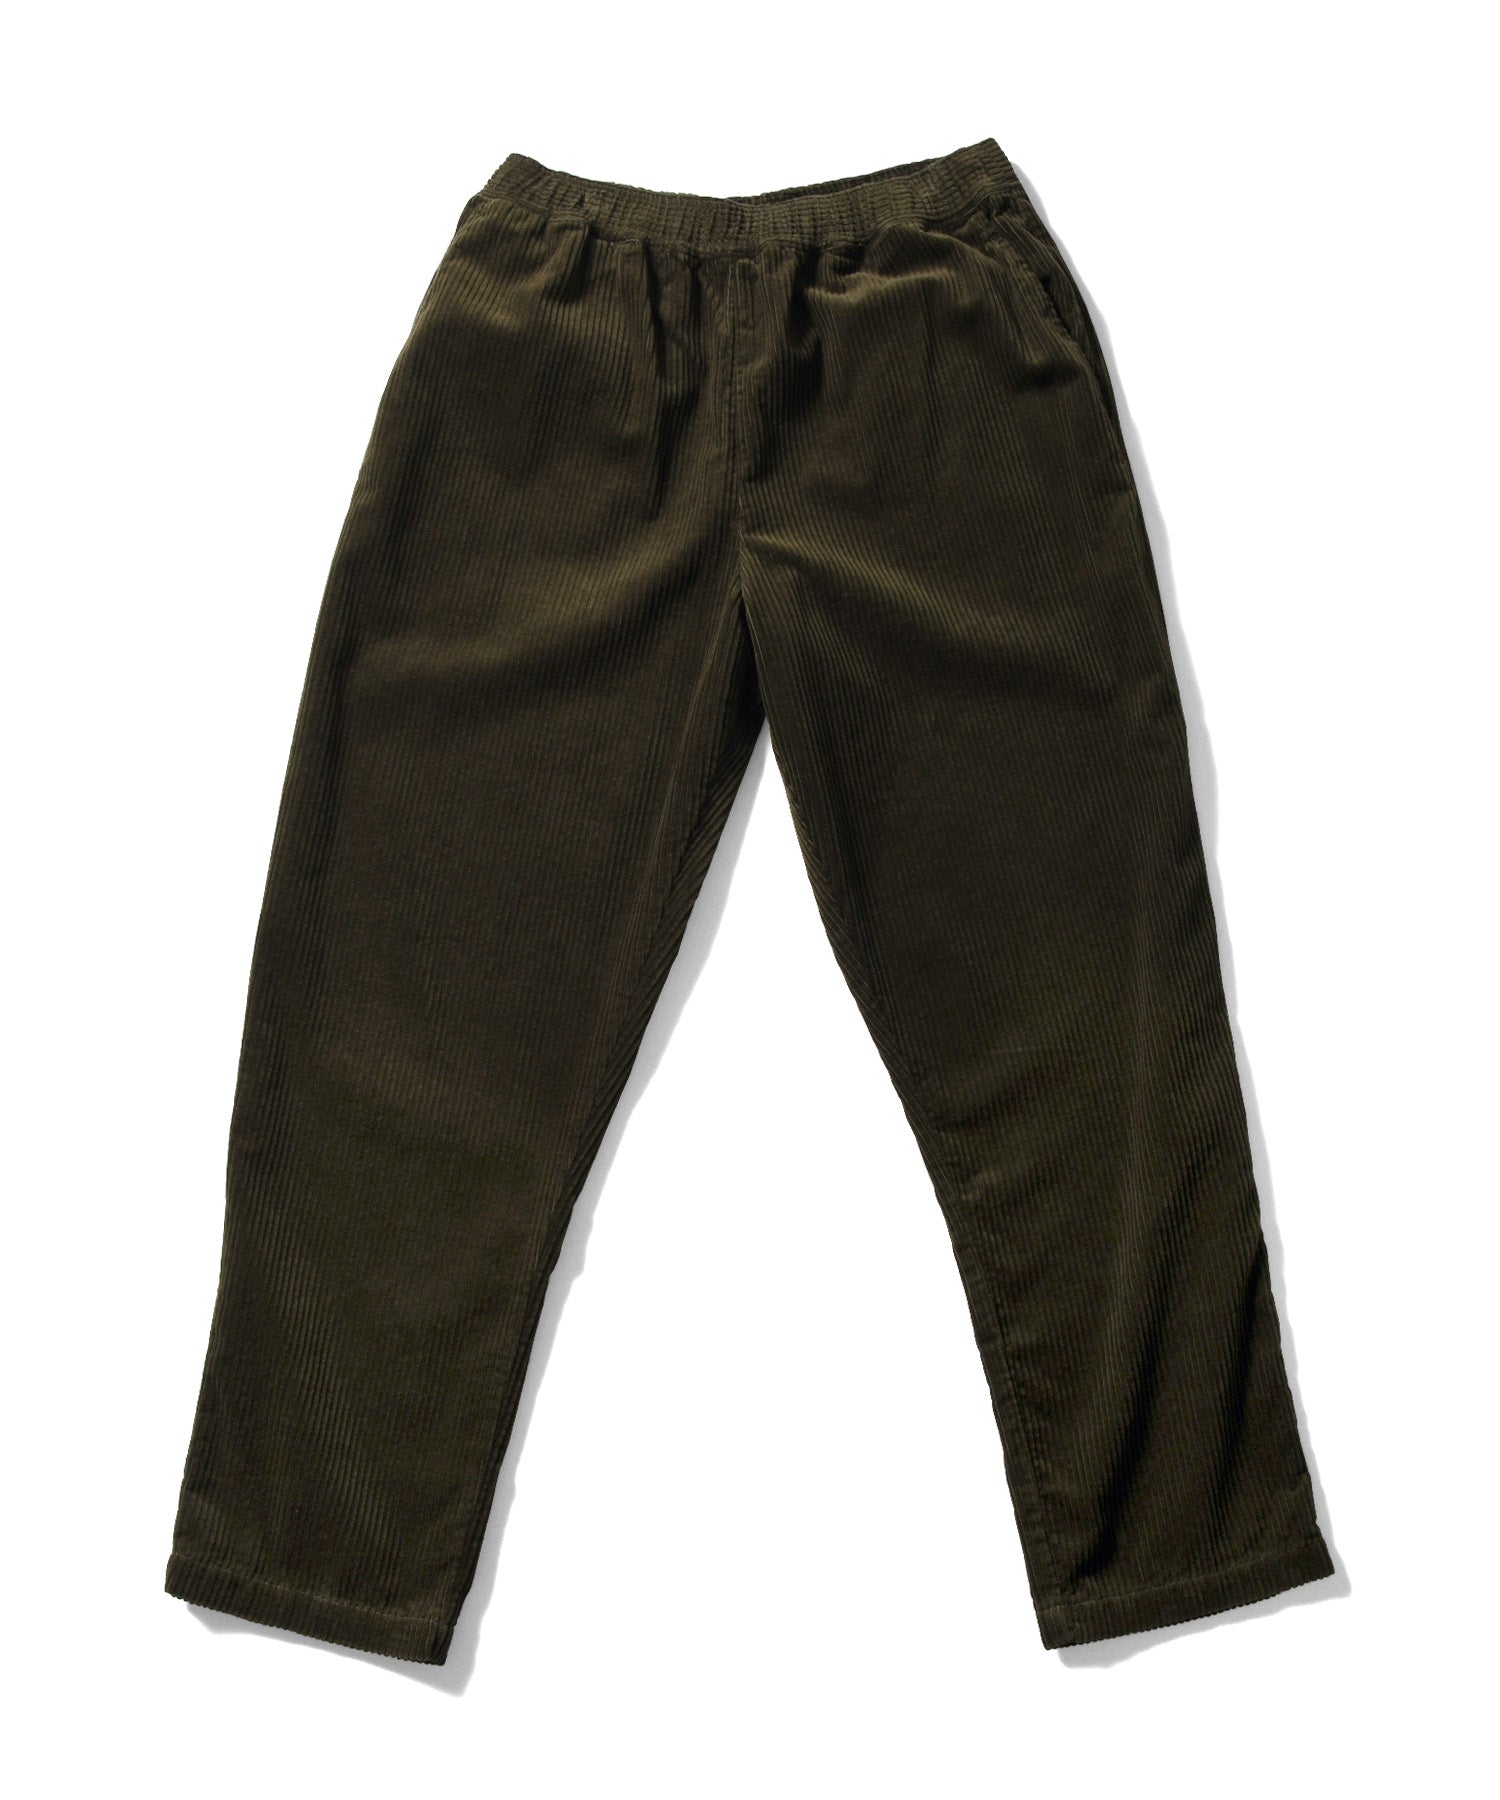 LFYT RELAXED FIT CORDUROY CHEF PANTS LA221204 OLIVE